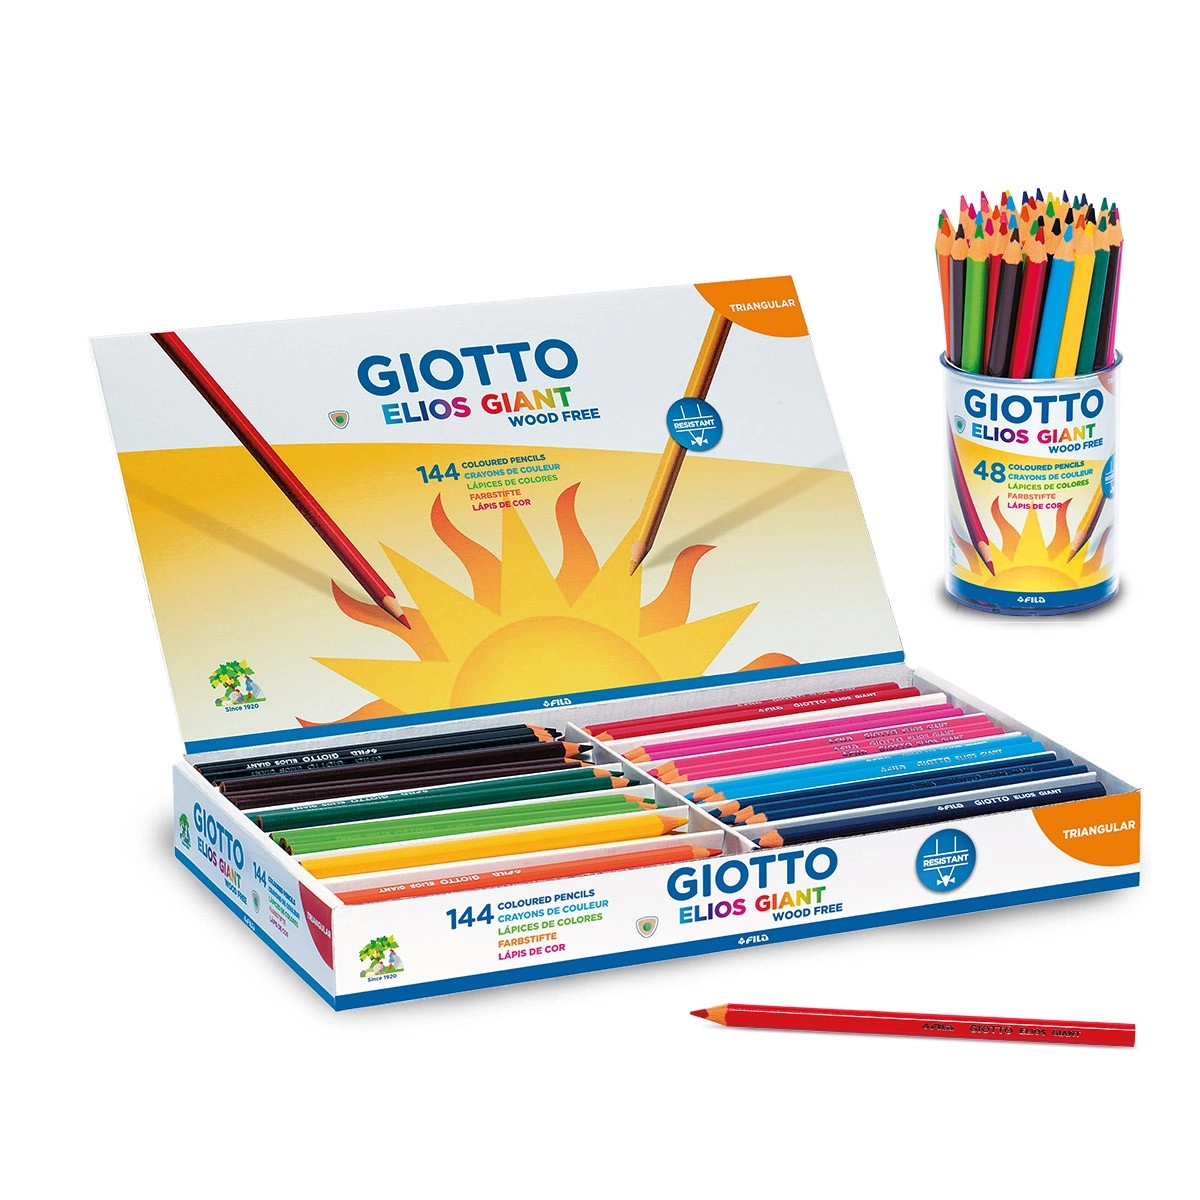  Giotto Be Be Super Large Giant Colored Pencils 12 PCS with  Large Pencil Sharpener : Office Products